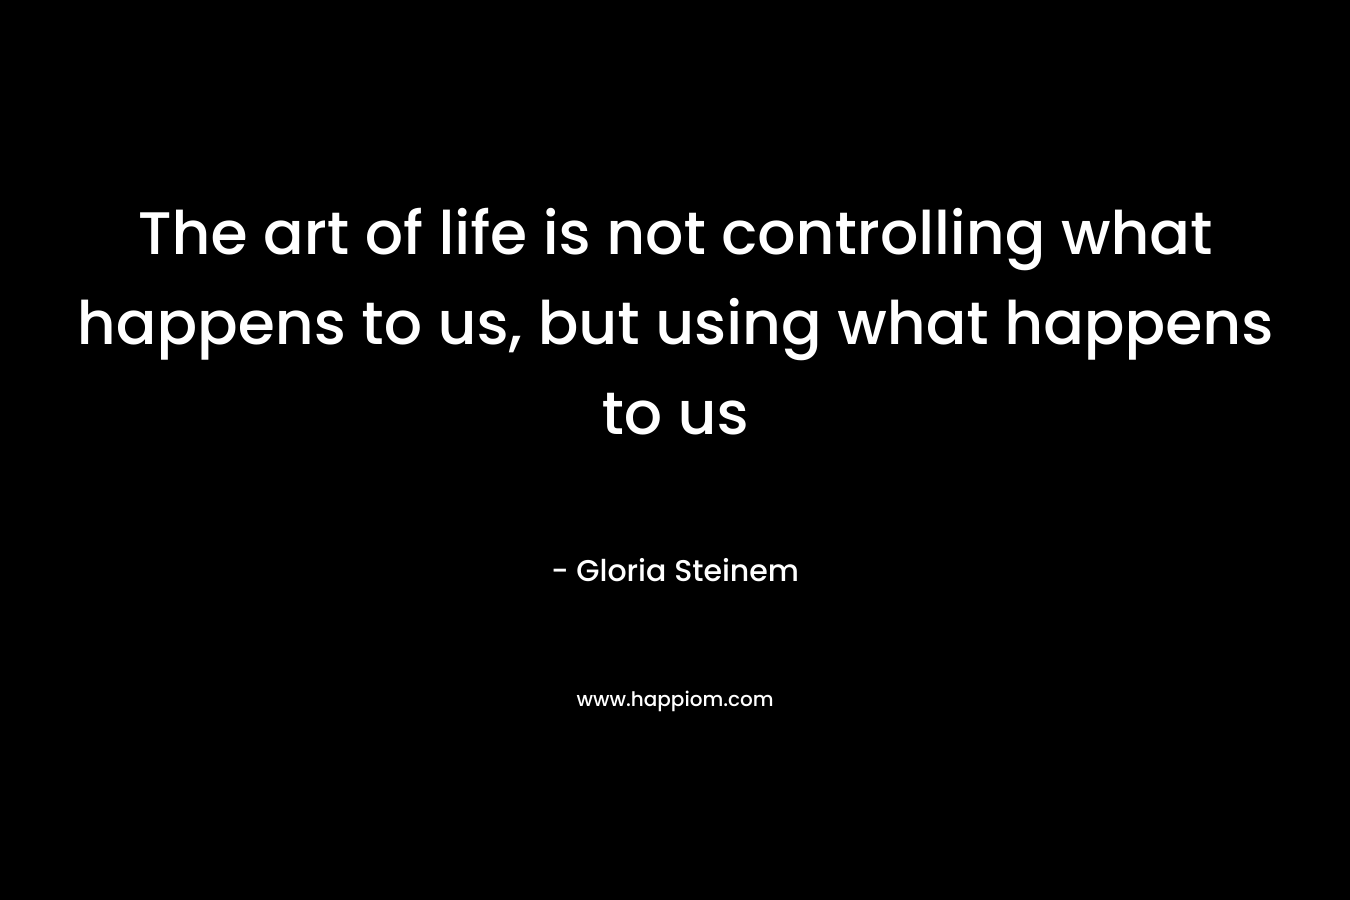 The art of life is not controlling what happens to us, but using what happens to us